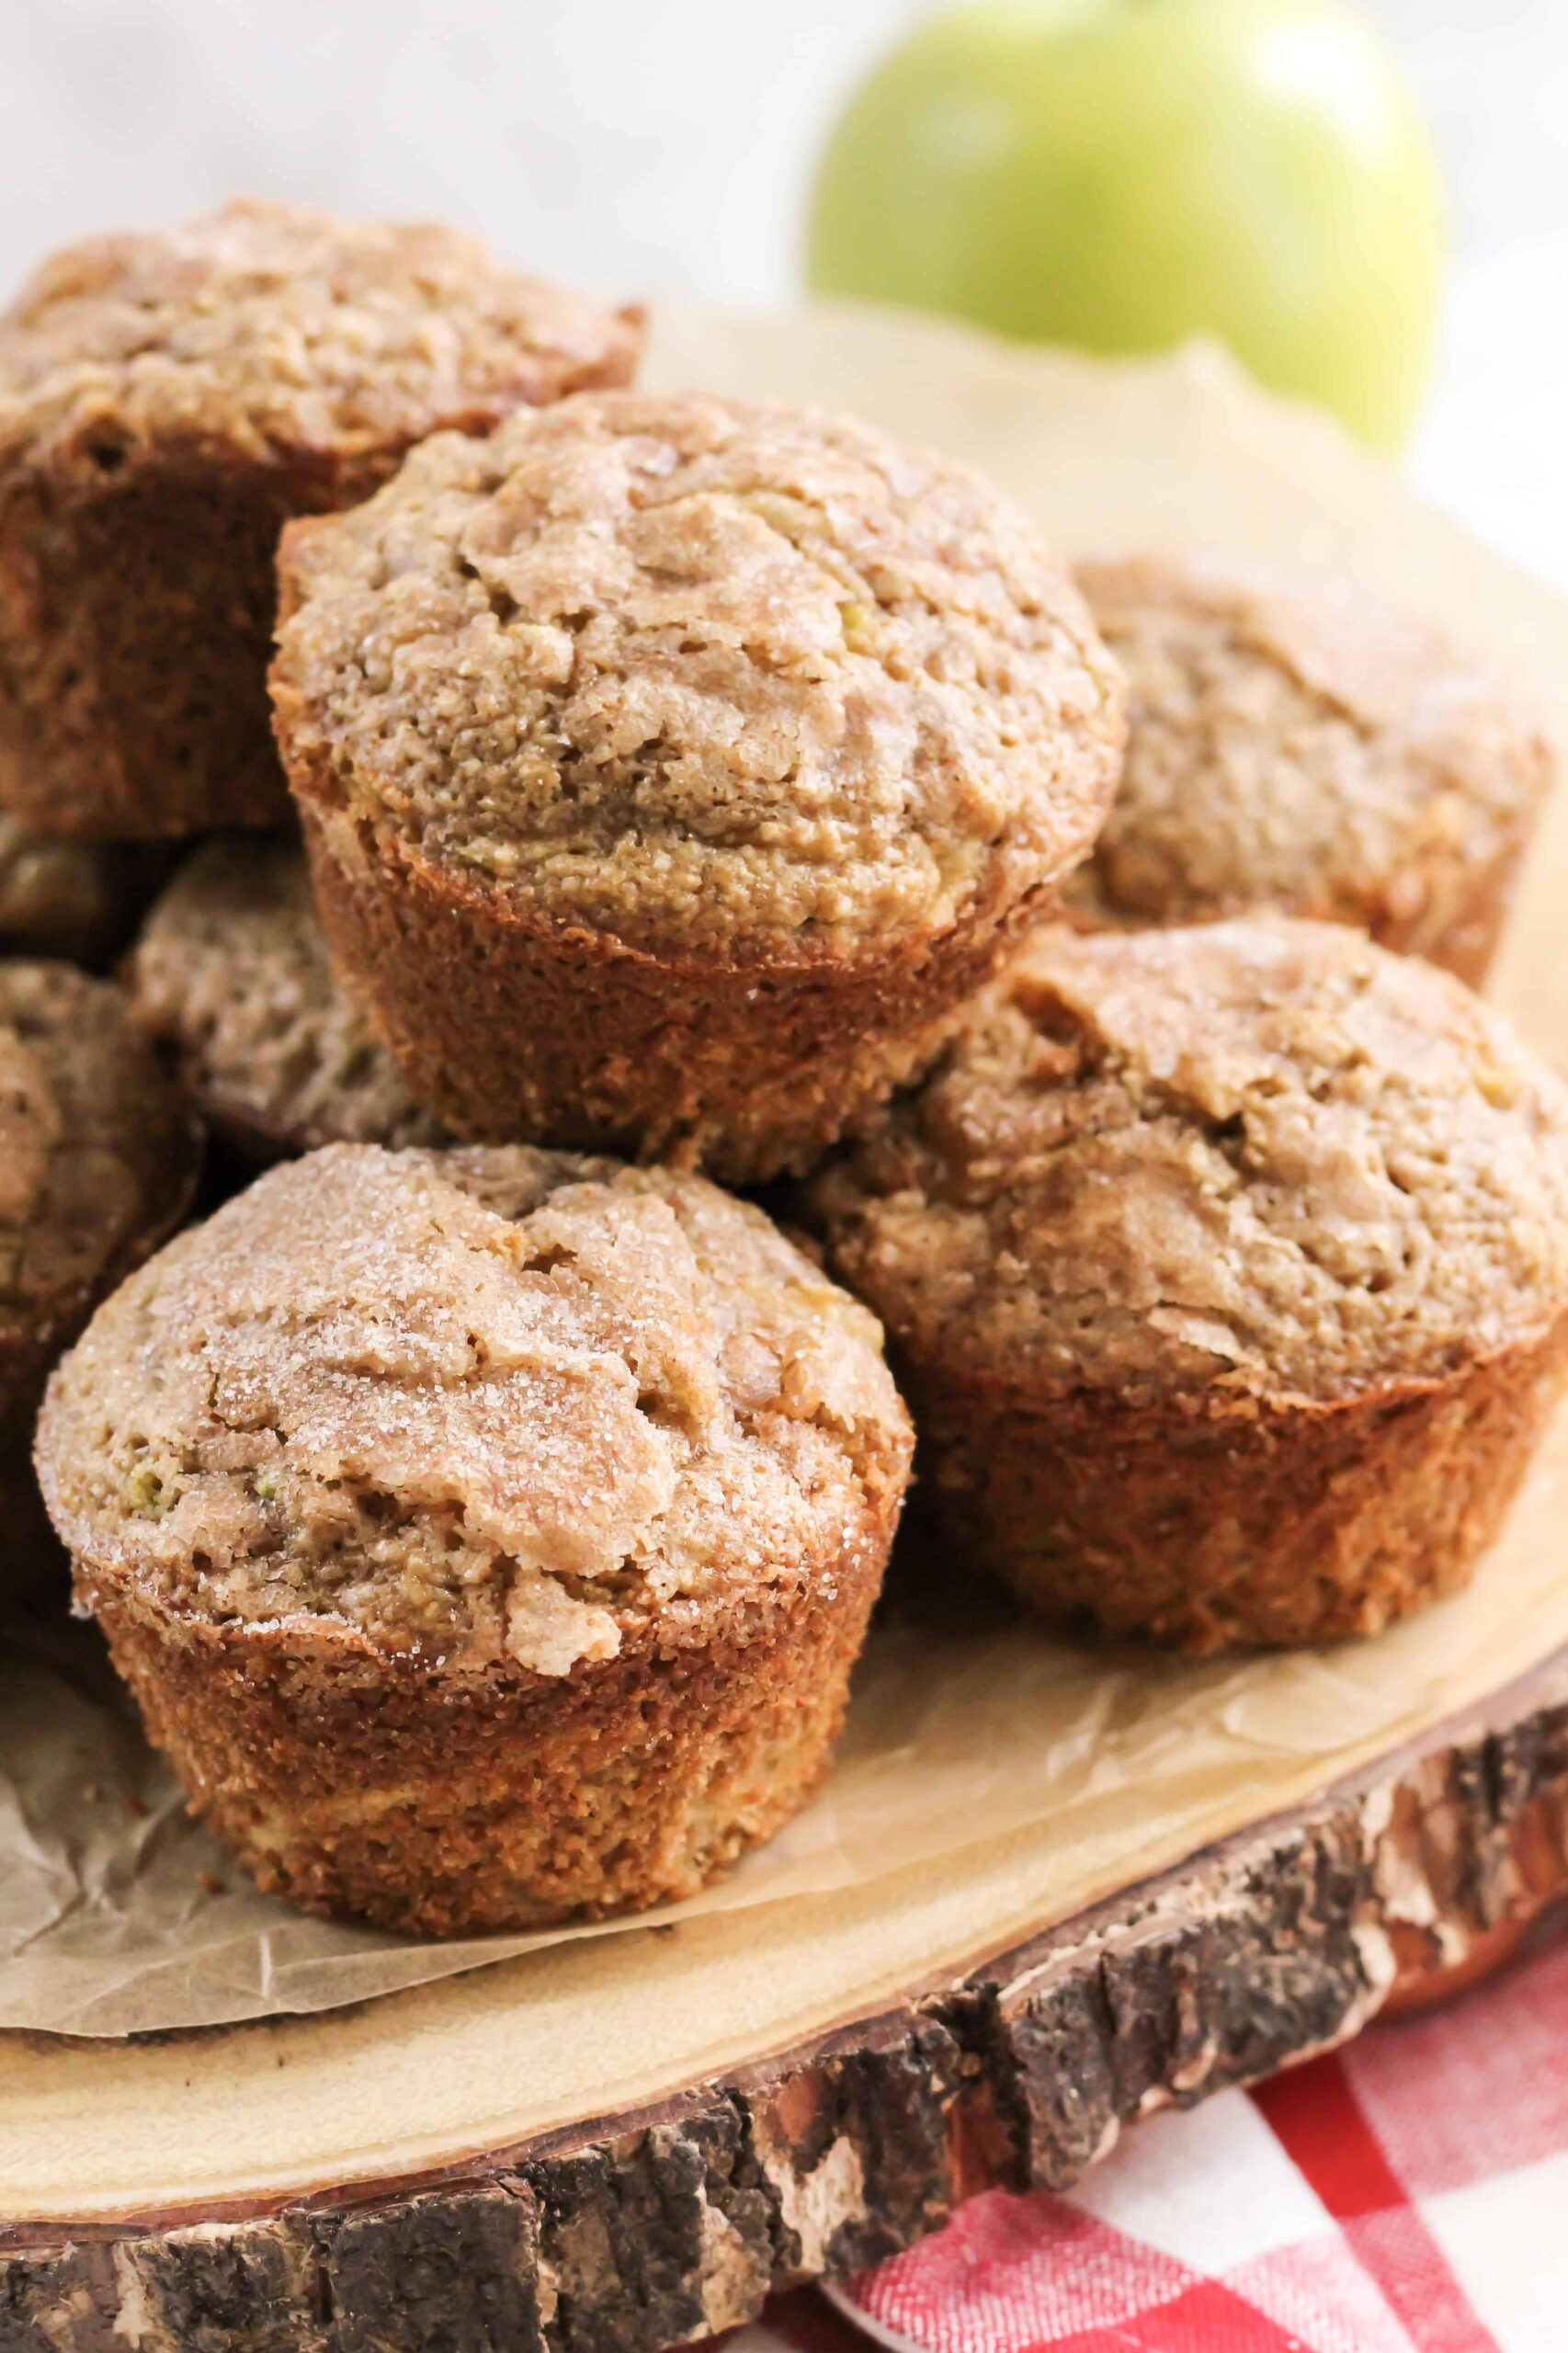  Start your day on a sweet note with these Cinnamon Oatmeal Muffins!